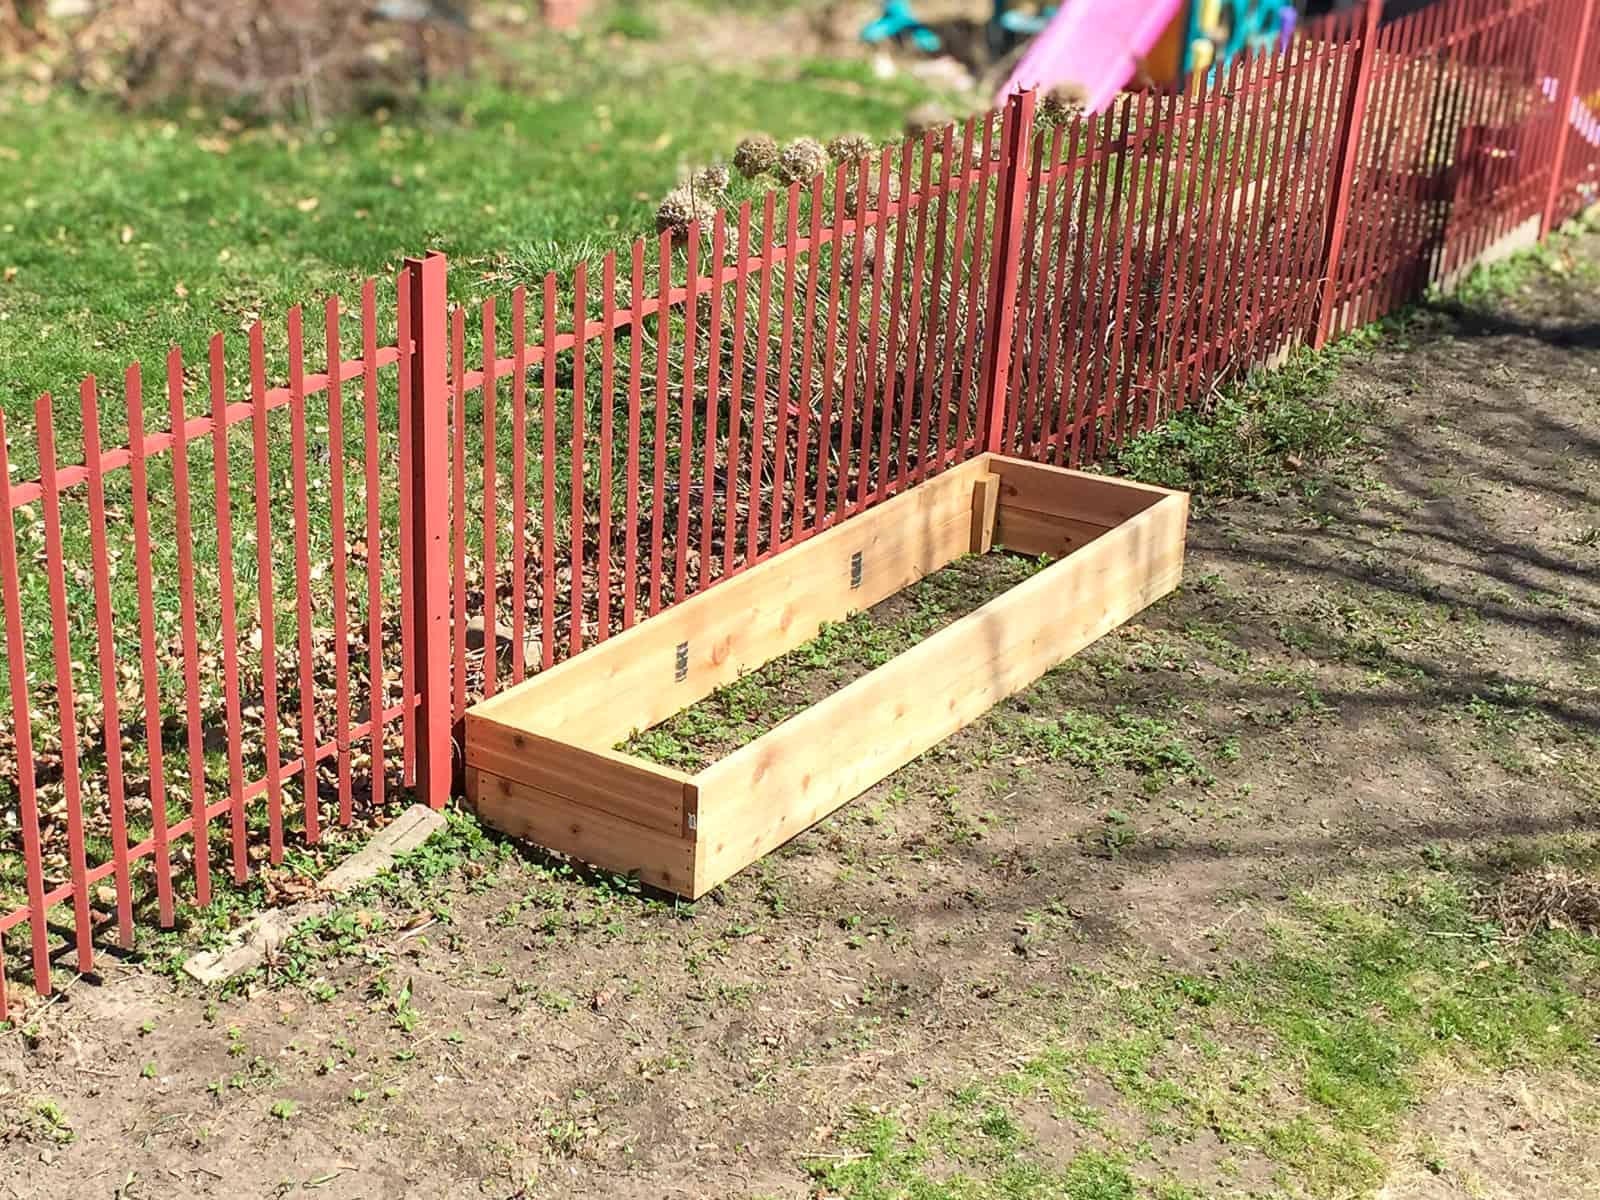 An image of a raised bed, not yet filled with soil, sitting in a backyard, soon to be used with the Square Foot Garden method.